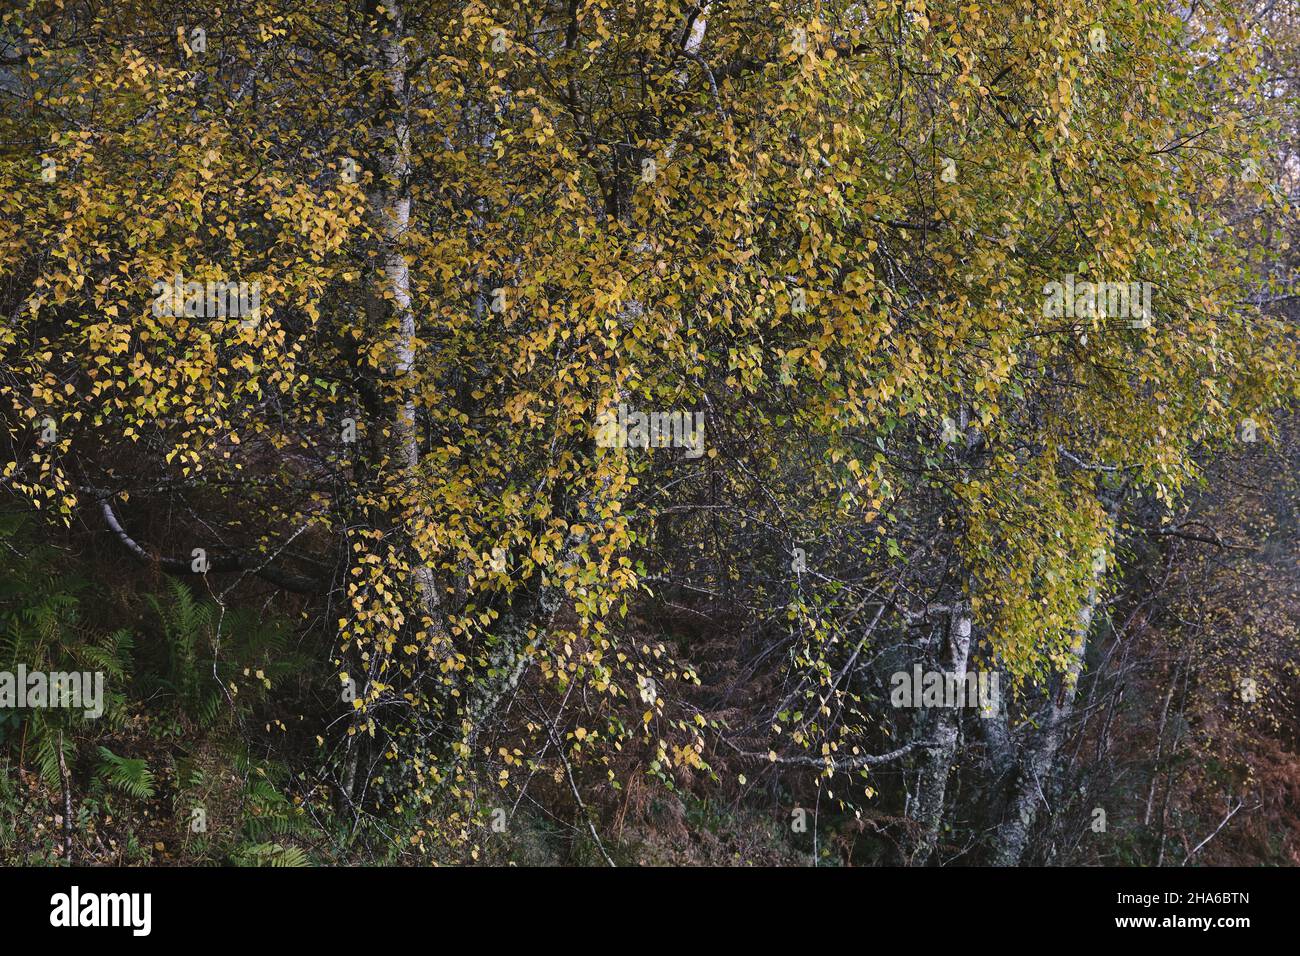 Betula pubescens or Betula alba European white birch deciduous trees with yellow autumnal foliage in the forests of Courel mountains Stock Photo